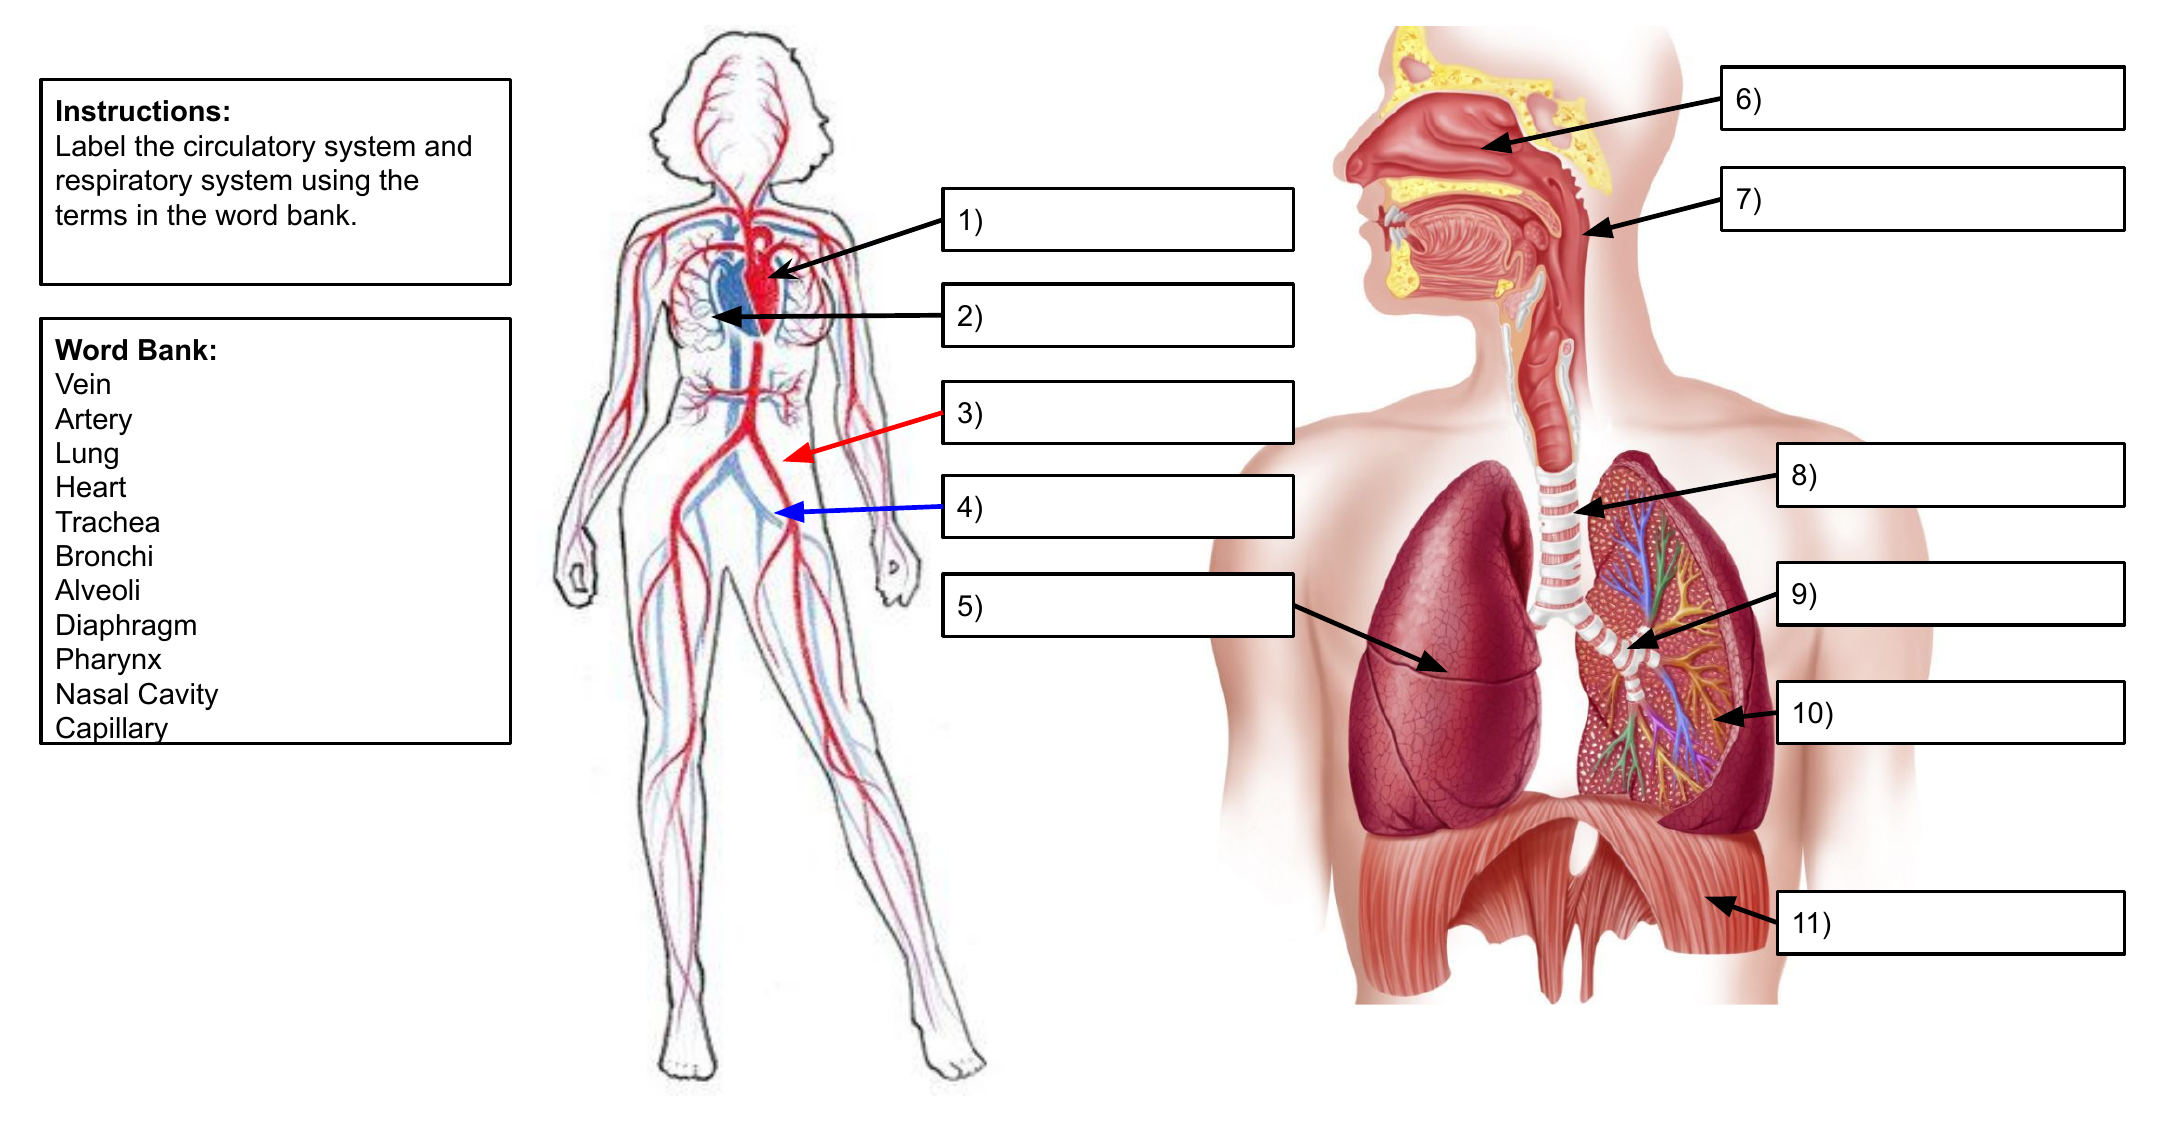 34-label-the-circulatory-system-labels-2021